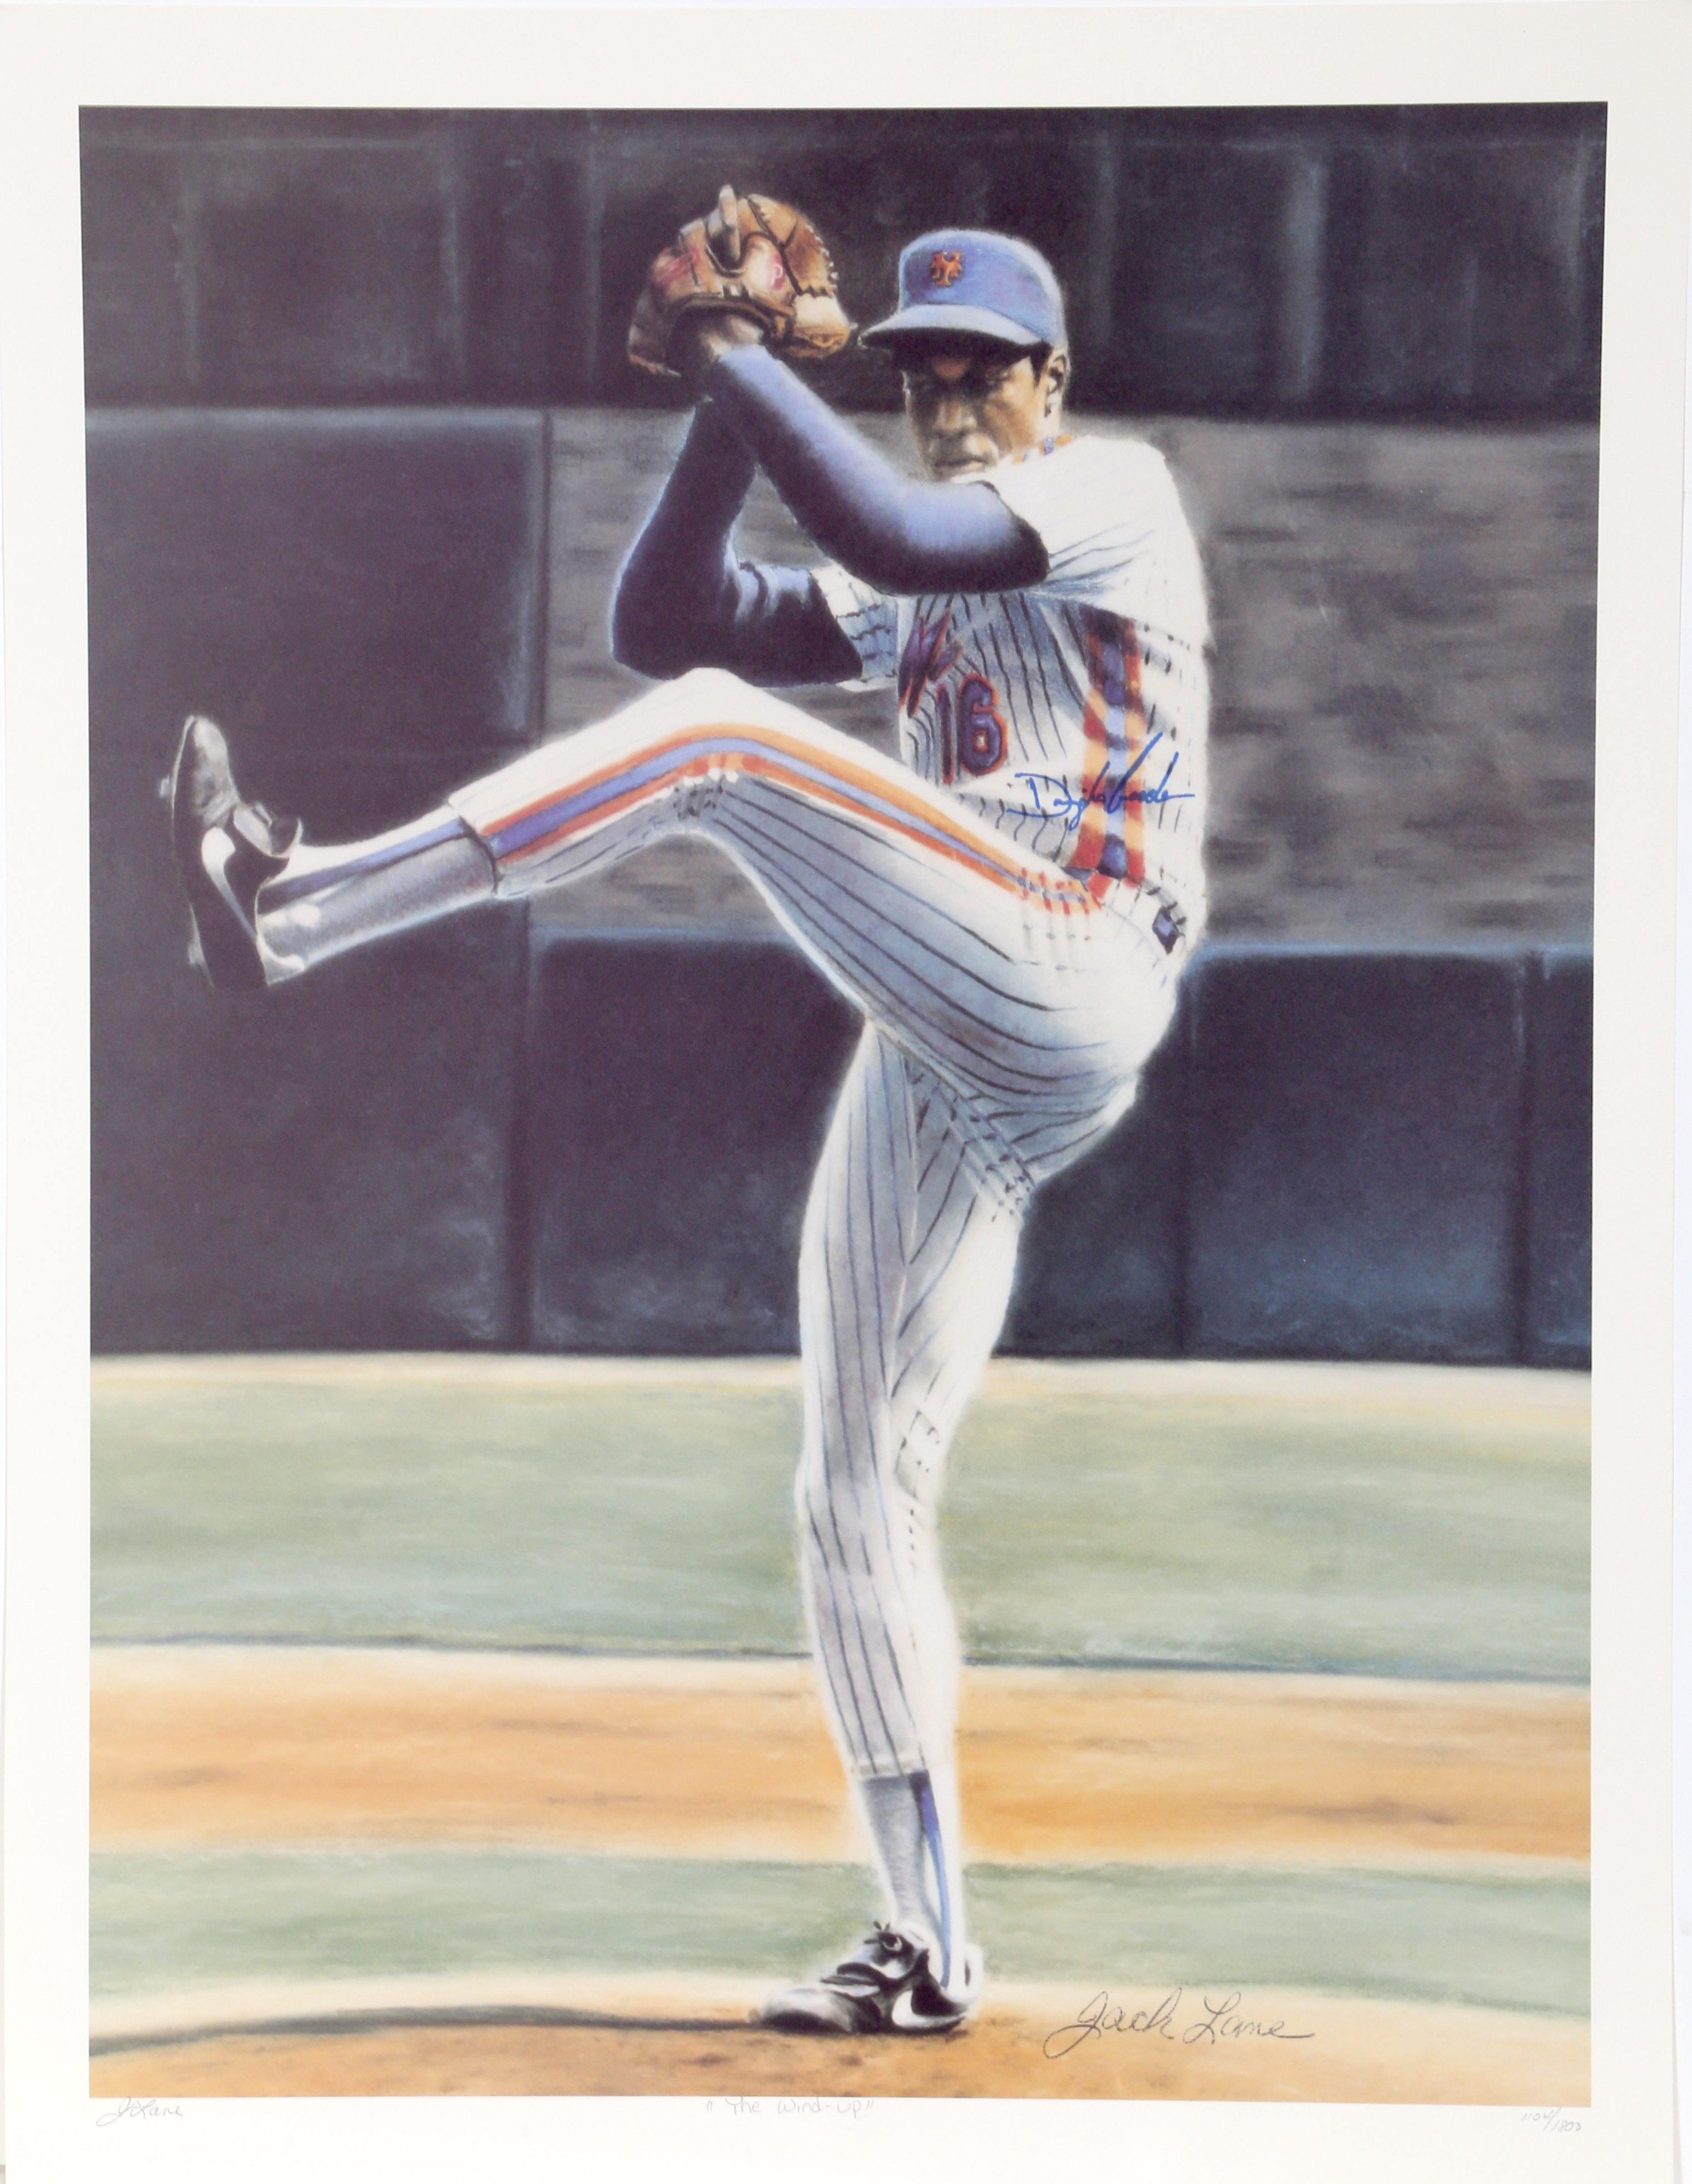 The Wind Up (New York Mets Dwight Gooden)